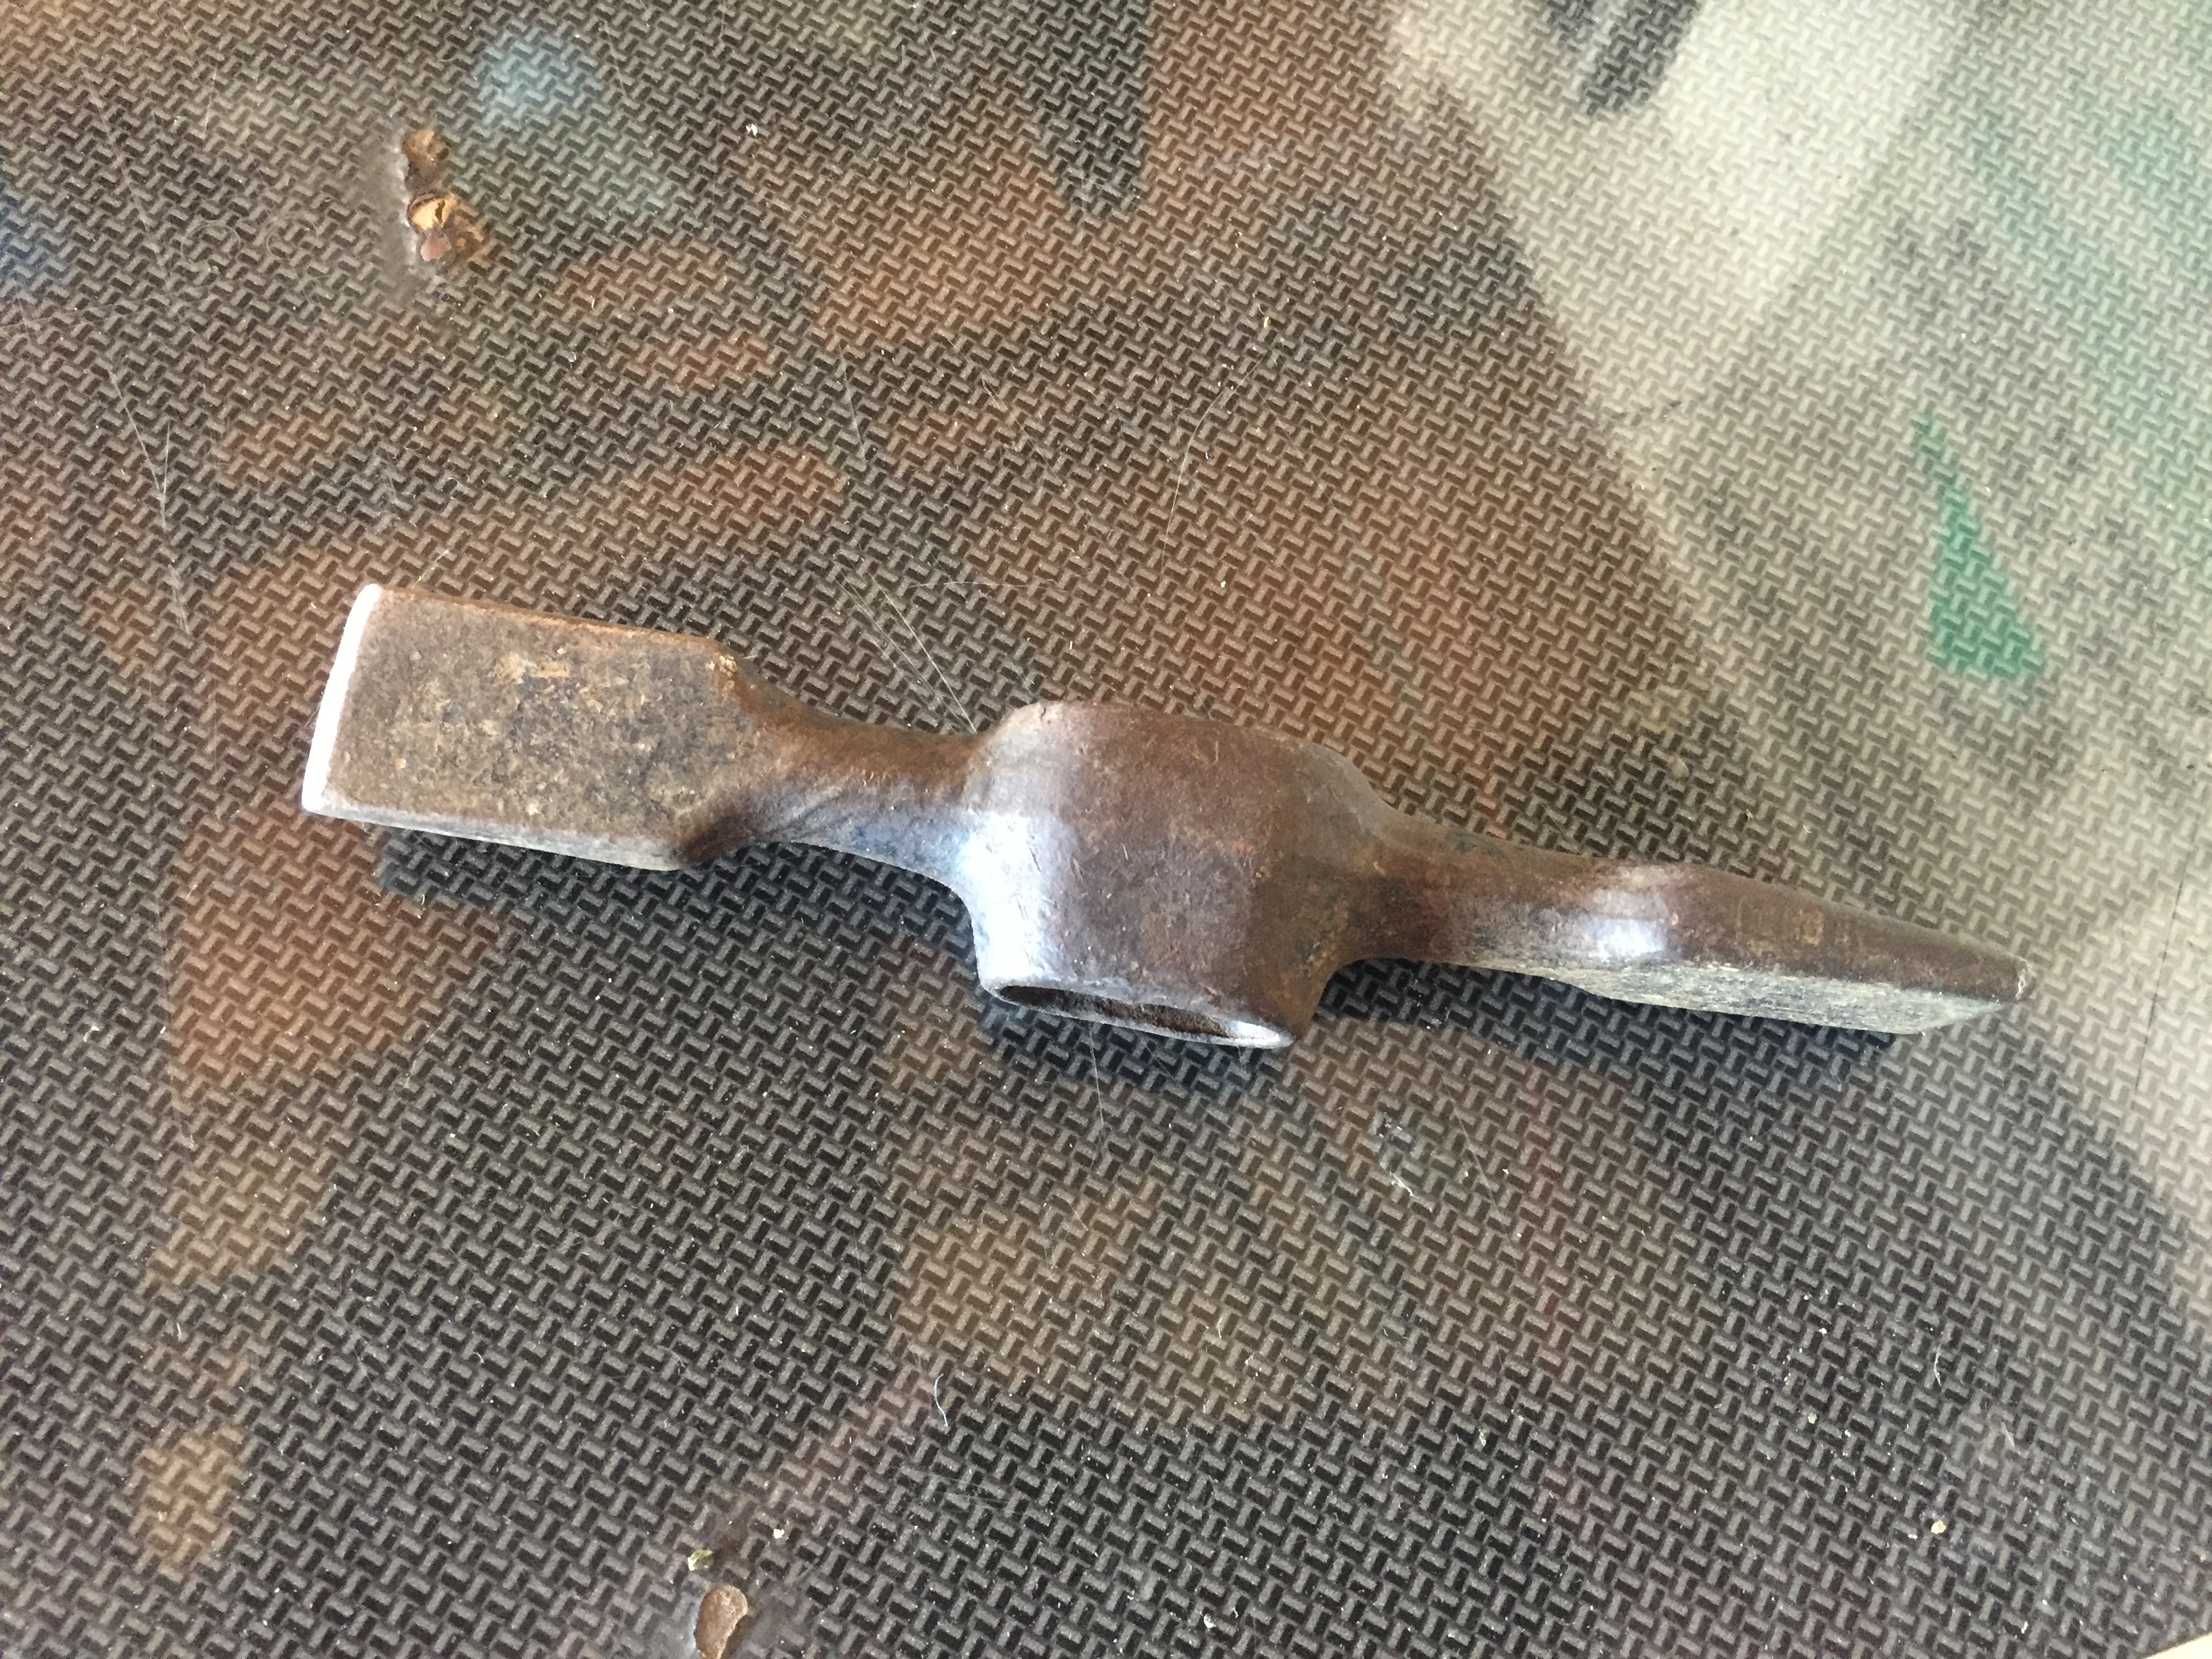 Hammer identification - Hand Hammers - I Forge Iron